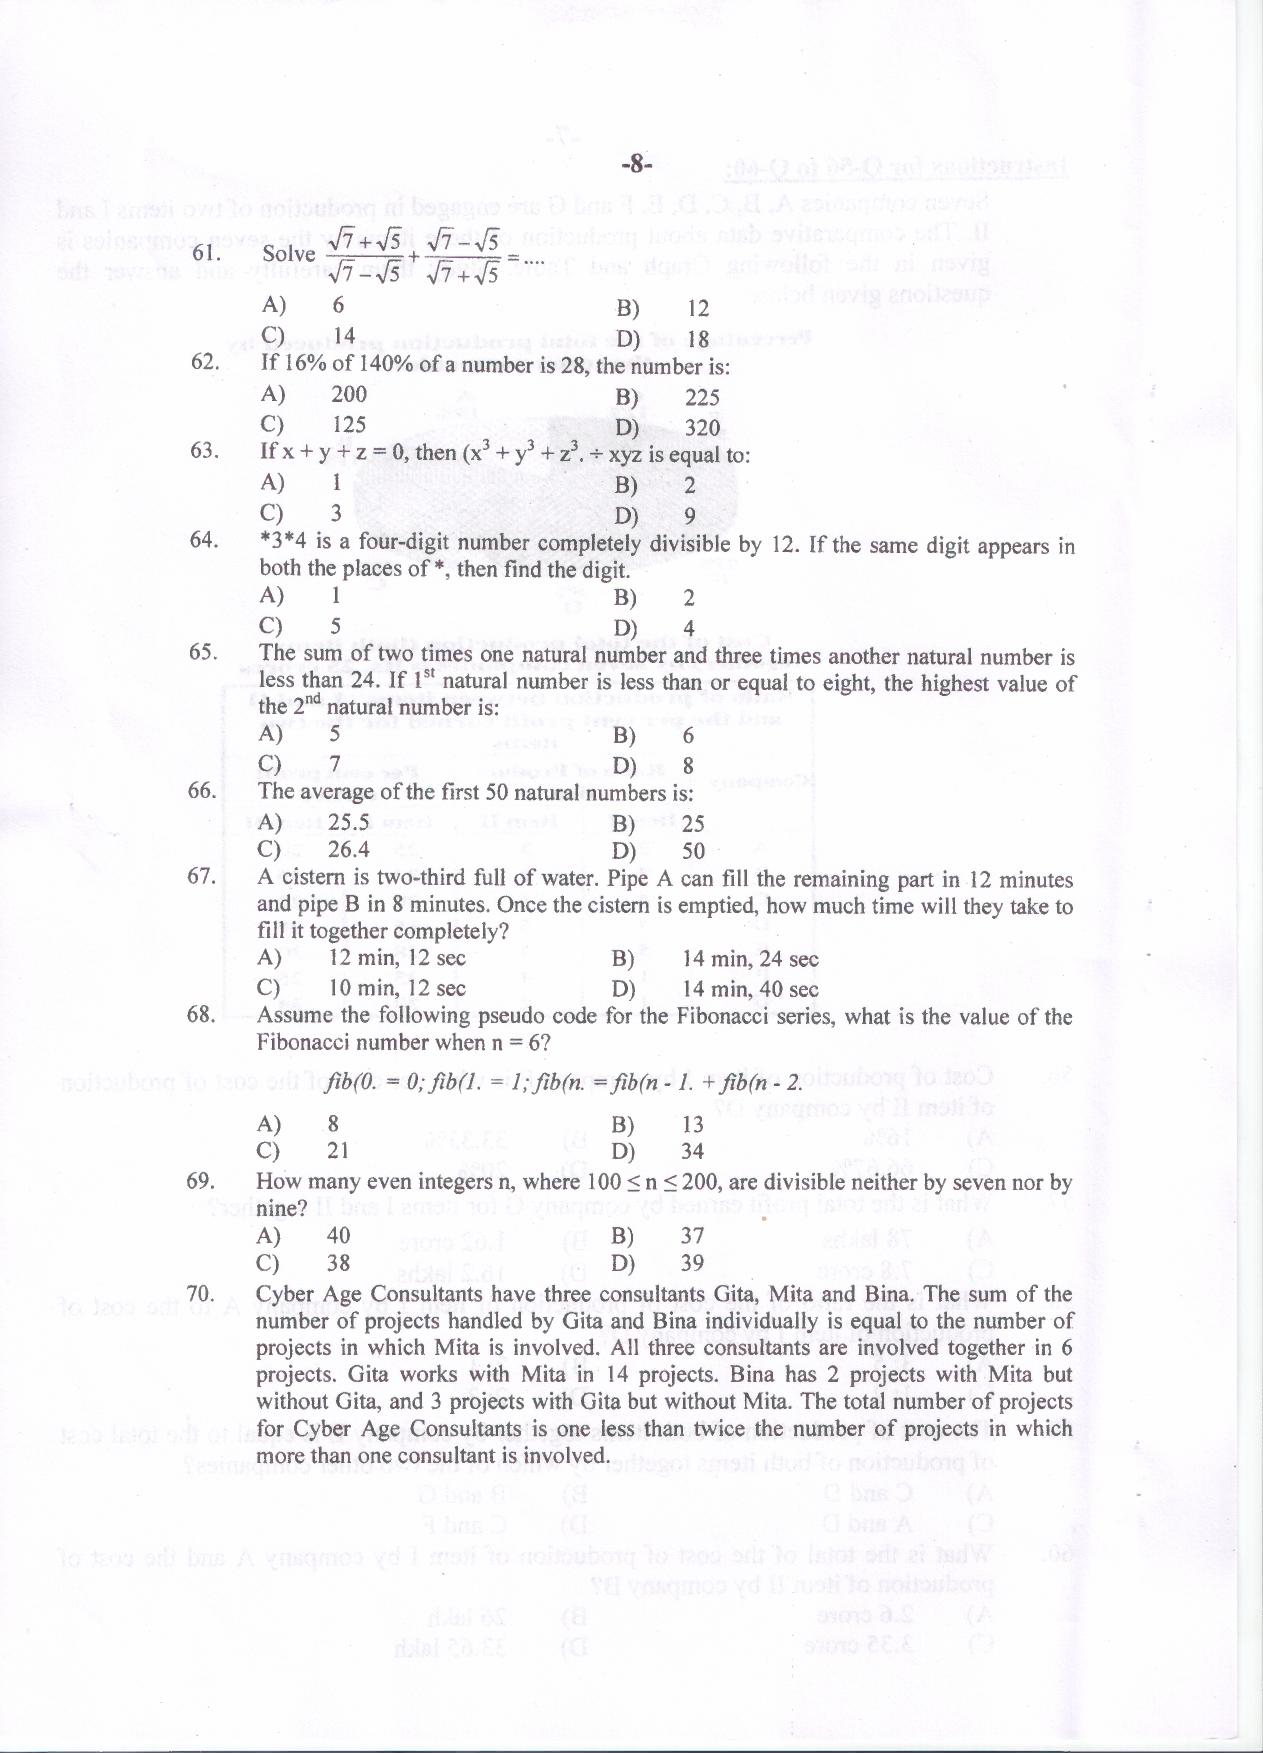 PU MET 2014 Question Booklet with Key - Page 8